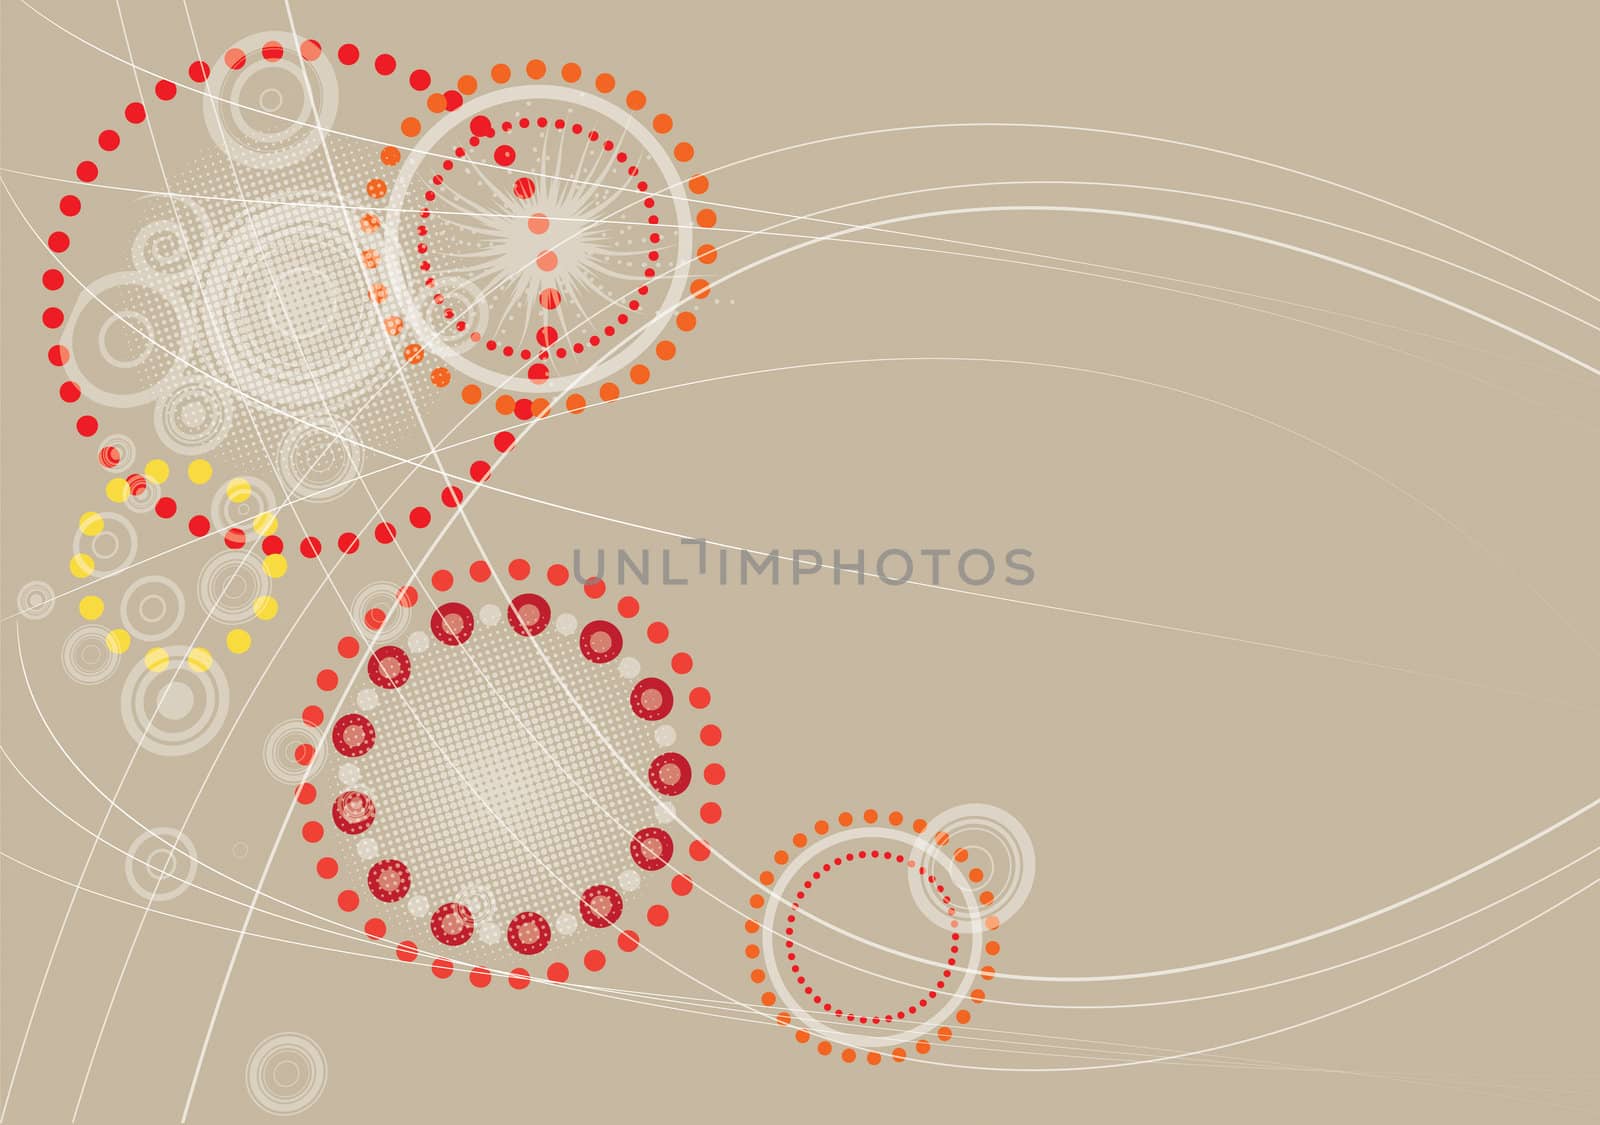 A landscape format abstract pattern with a light brown based theme. Thin flowing lines and concentric circles in oranges, reds and yellows. Ideal for background wallpaper use and for hand held device.